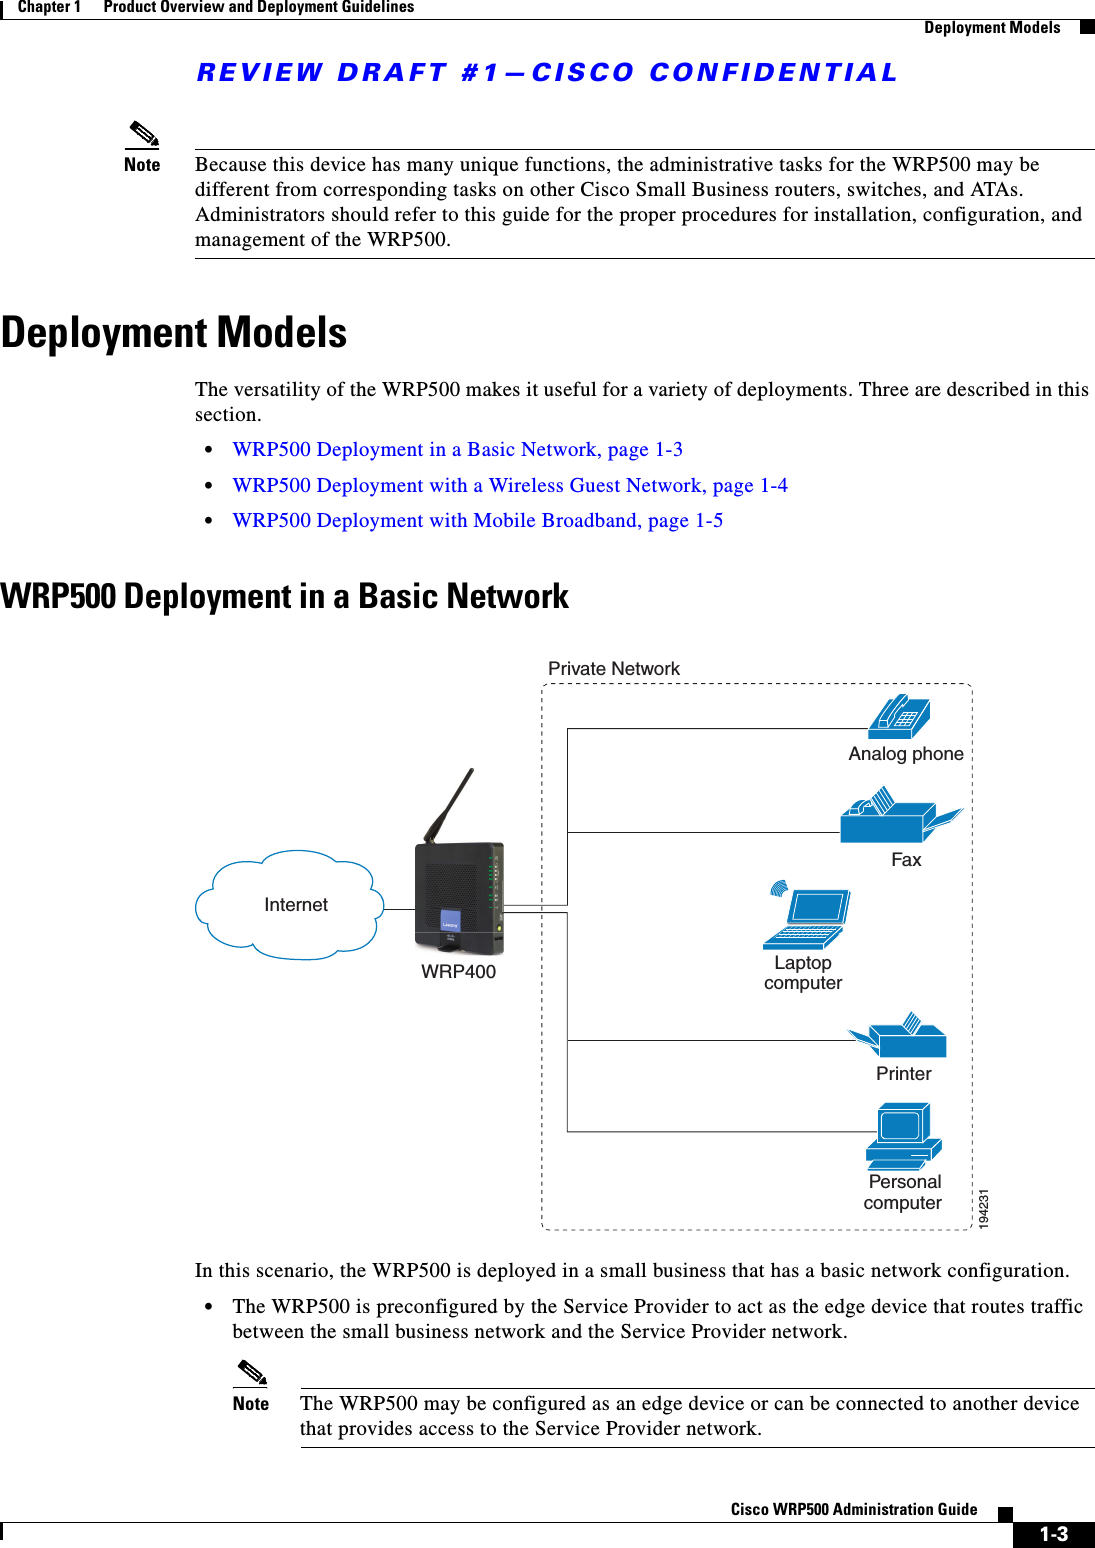 REVIEW DRAFT #1—CISCO CONFIDENTIAL1-3Cisco WRP500 Administration Guide Chapter 1      Product Overview and Deployment Guidelines  Deployment ModelsNote Because this device has many unique functions, the administrative tasks for the WRP500 may be different from corresponding tasks on other Cisco Small Business routers, switches, and ATAs. Administrators should refer to this guide for the proper procedures for installation, configuration, and management of the WRP500.Deployment ModelsThe versatility of the WRP500 makes it useful for a variety of deployments. Three are described in this section.•WRP500 Deployment in a Basic Network, page 1-3•WRP500 Deployment with a Wireless Guest Network, page 1-4•WRP500 Deployment with Mobile Broadband, page 1-5WRP500 Deployment in a Basic NetworkIn this scenario, the WRP500 is deployed in a small business that has a basic network configuration. •The WRP500 is preconfigured by the Service Provider to act as the edge device that routes traffic between the small business network and the Service Provider network.Note The WRP500 may be configured as an edge device or can be connected to another device that provides access to the Service Provider network.Personal computer WRP400 LaptopcomputerAnalog phoneFaxPrinter Private NetworkInternet194231